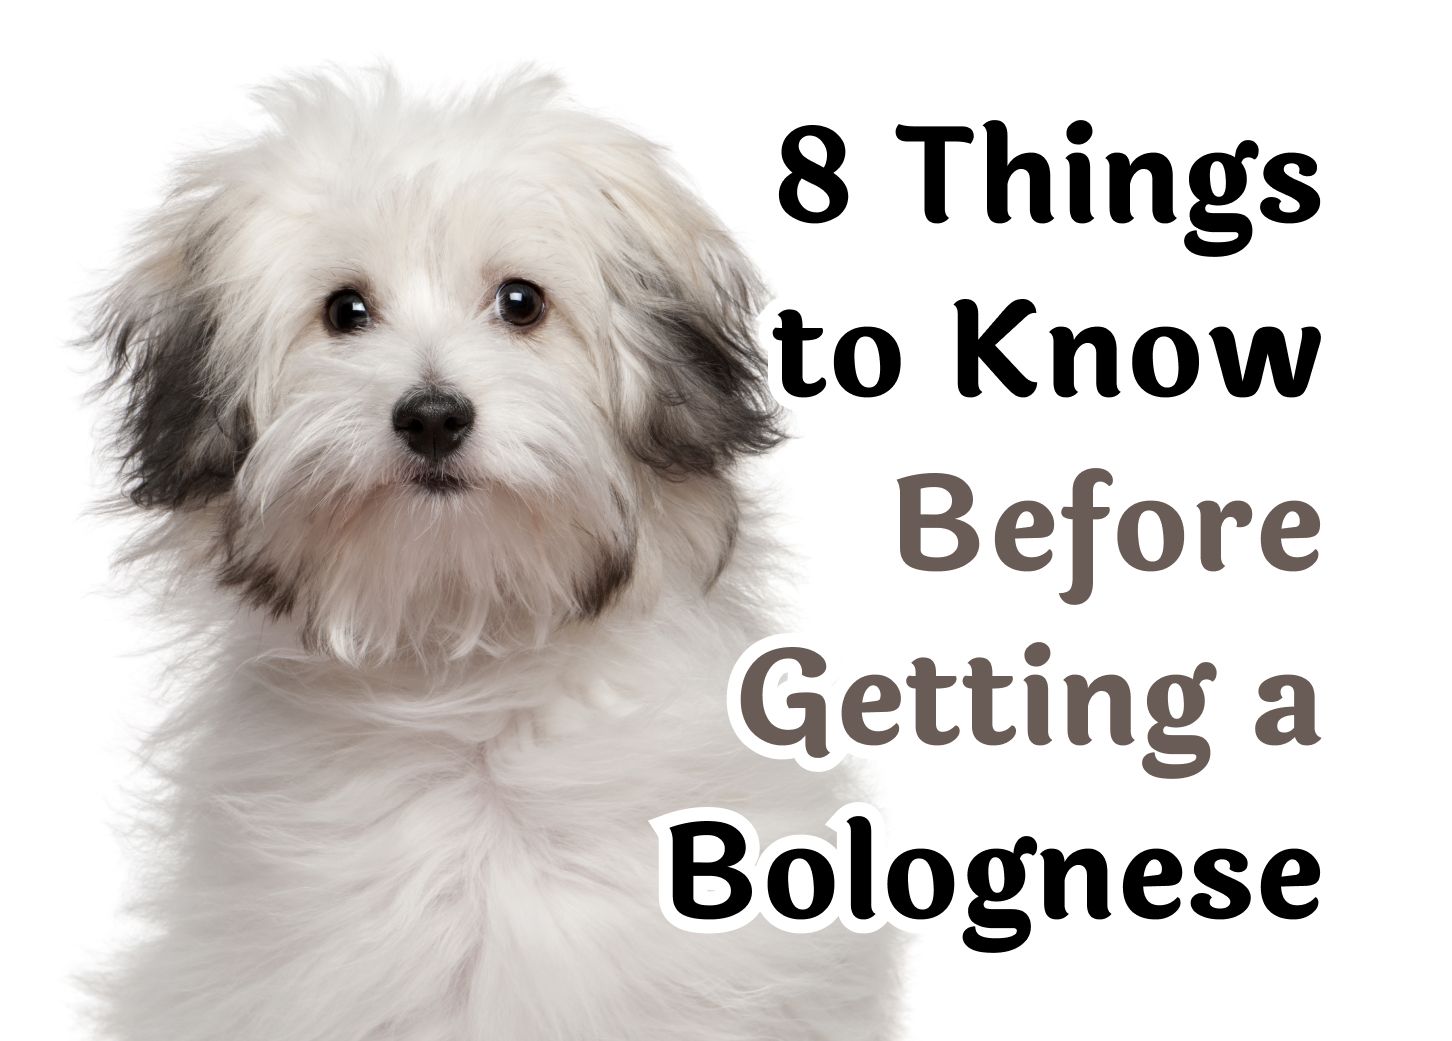 8 Things to Know Before Getting a Bolognese Dog